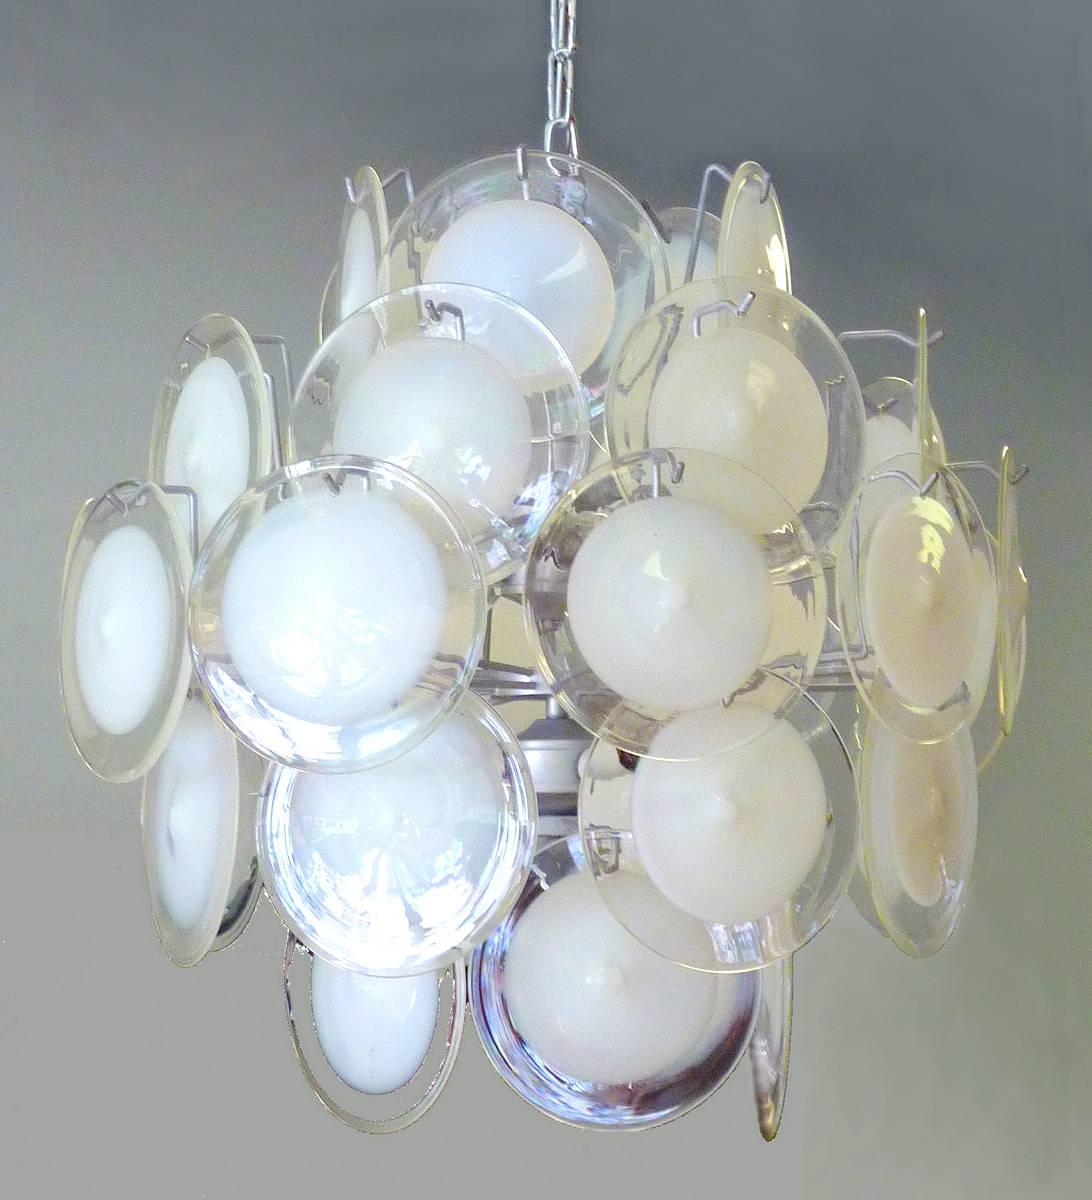 Gino Vistosi's fanciful chandeliers made in Italy during the 1960s are hard to find. This marvelous example features 36 milk and clear handblown Murano glass discs.

(Please note: We try to respond to messages within minutes, but in no event does it